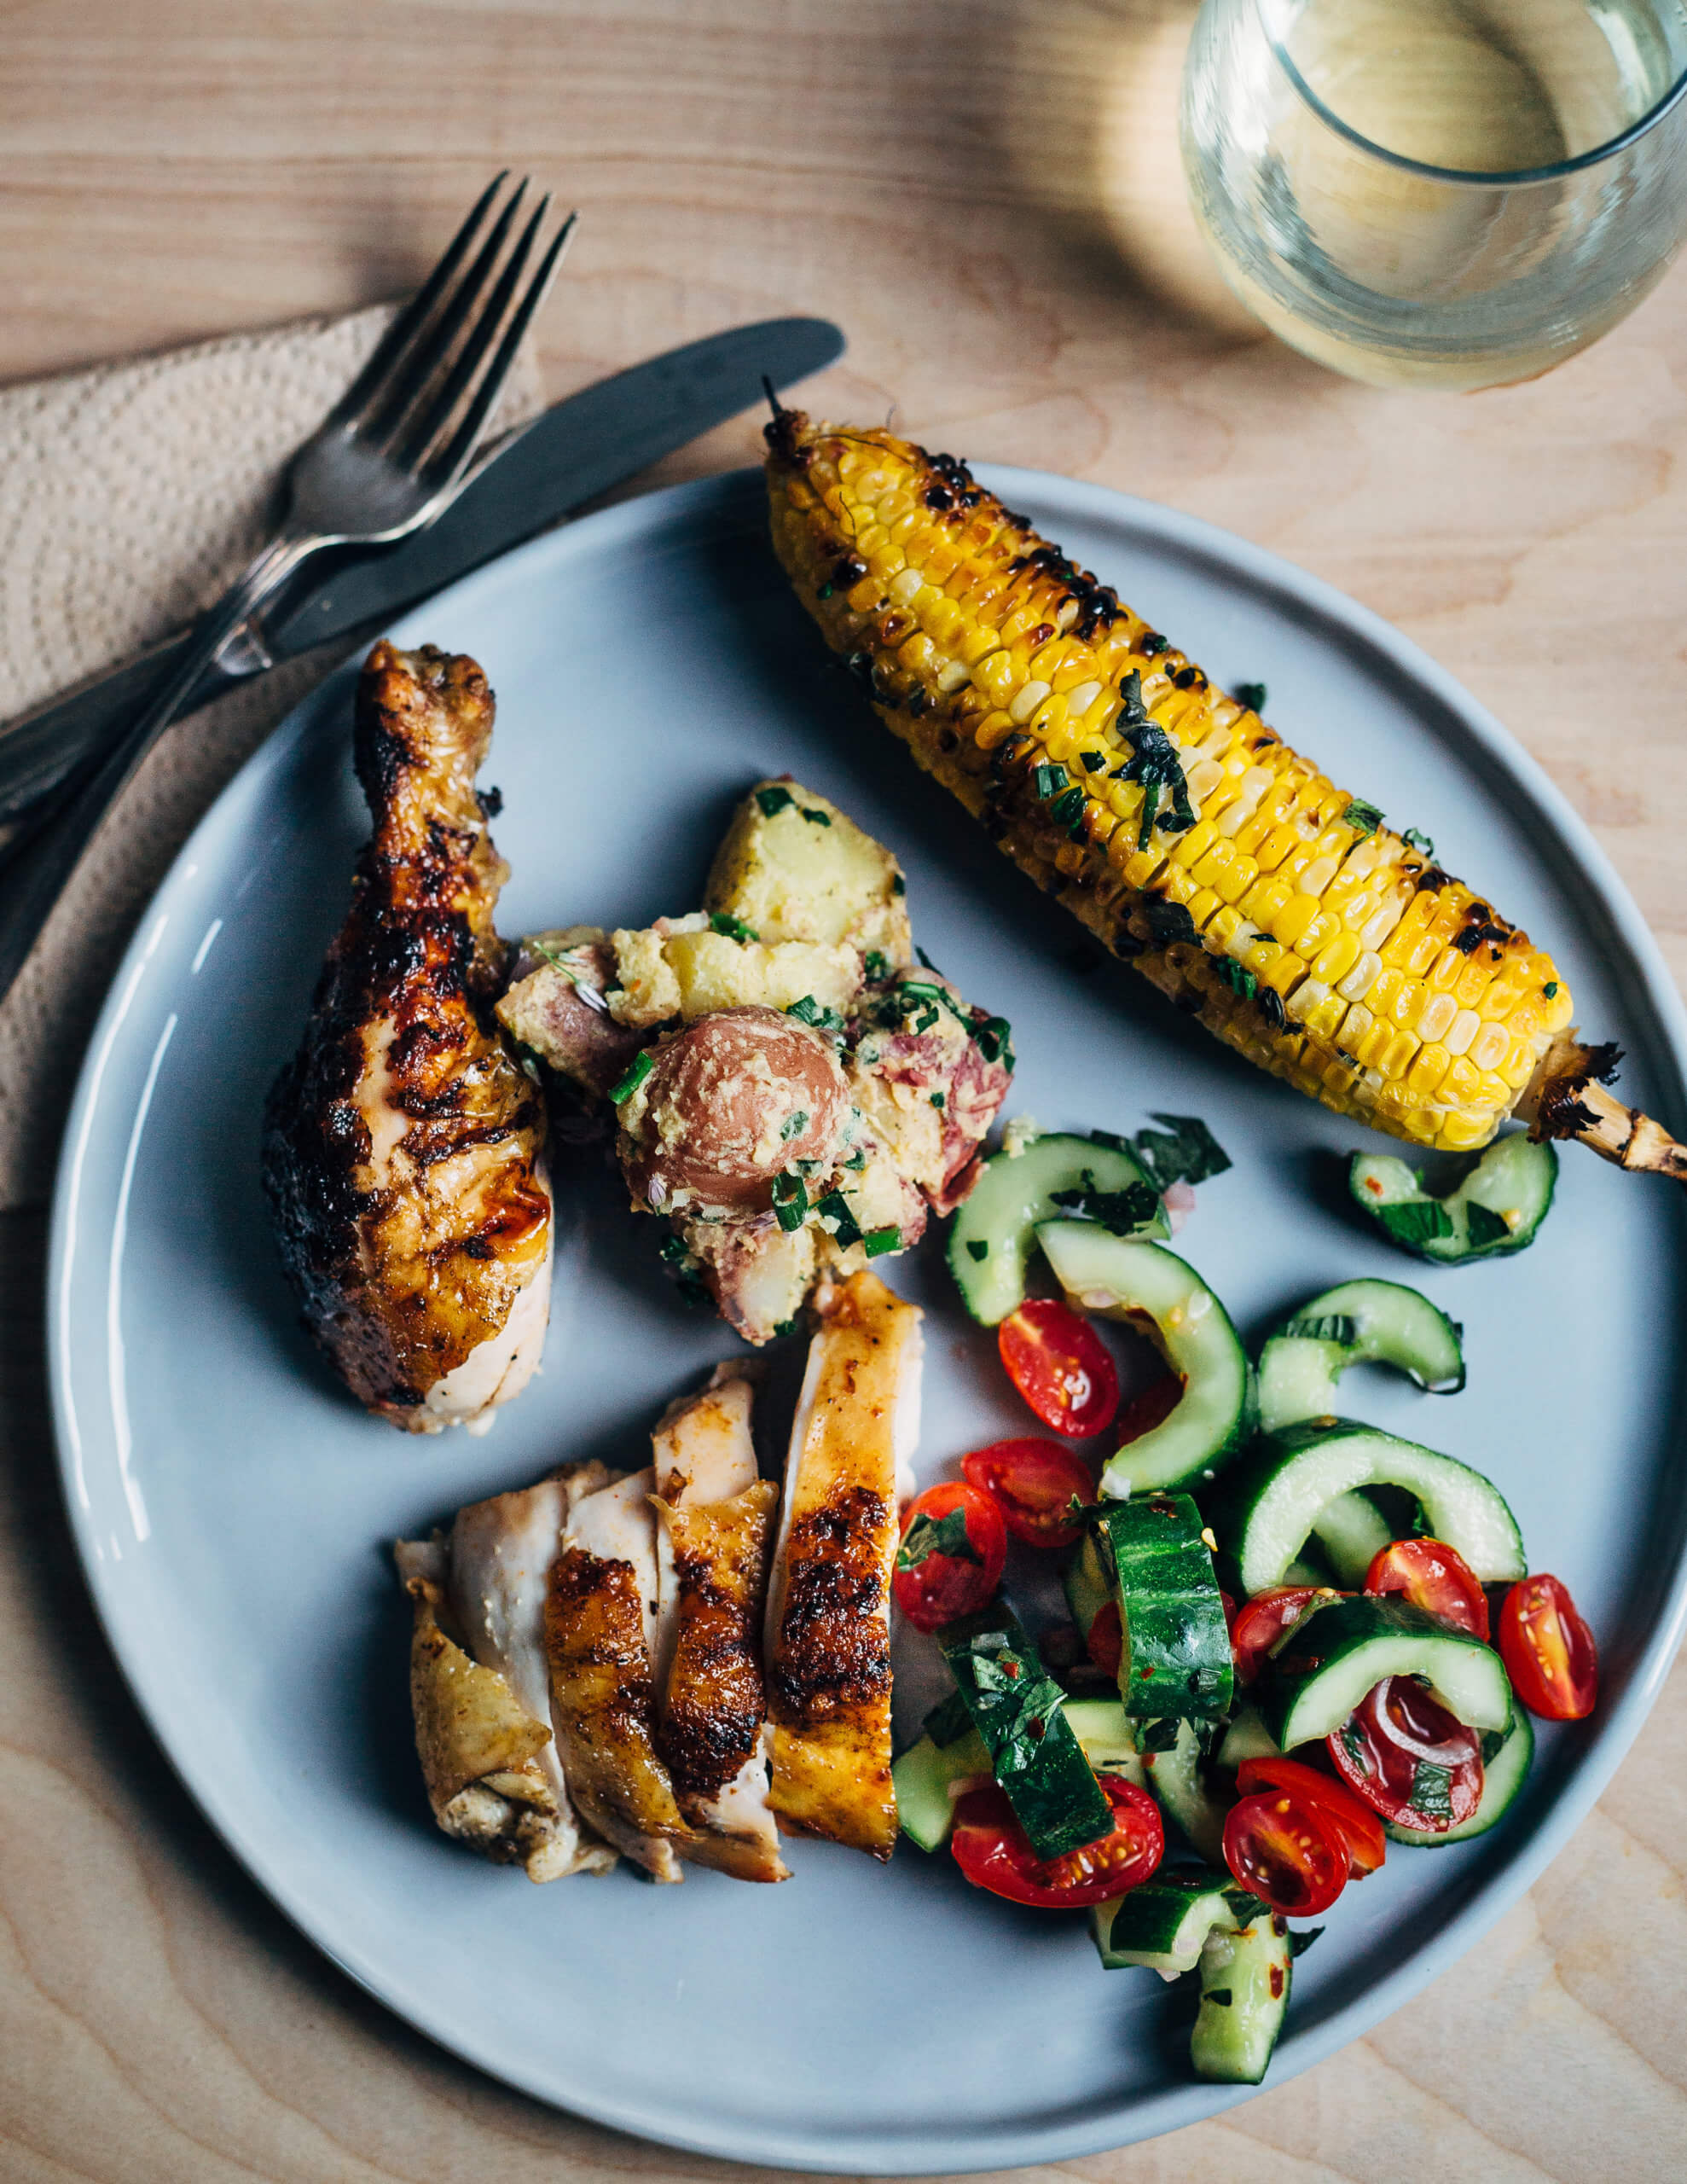 The perfect summer cookout plate: paprika and garlic grilled chicken, cucumber and tomato salad, Dijon potato salad, and corn on the cob. 